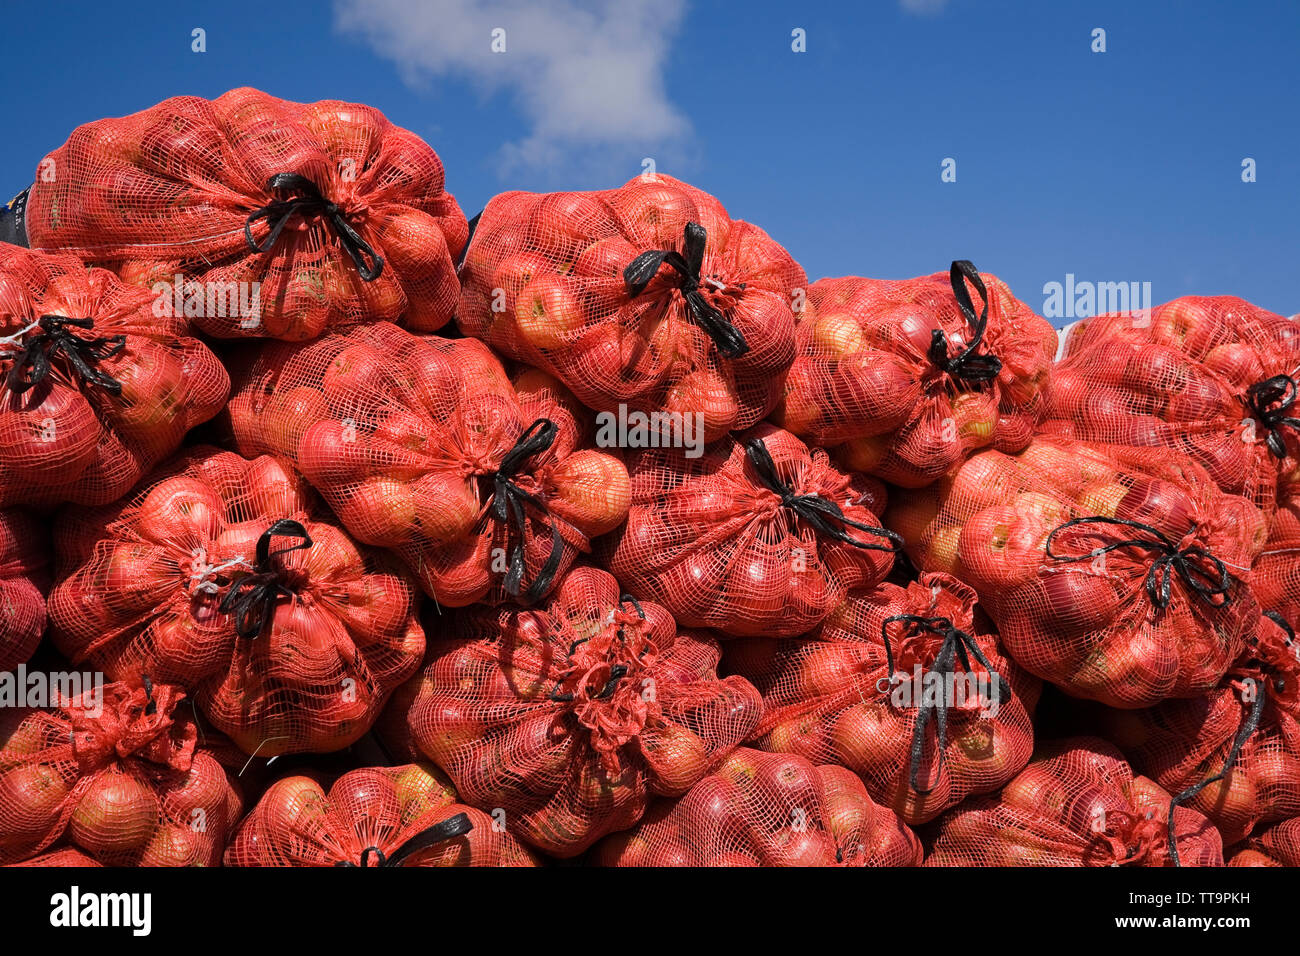 Harvested apples in fishnet bags Stock Photo